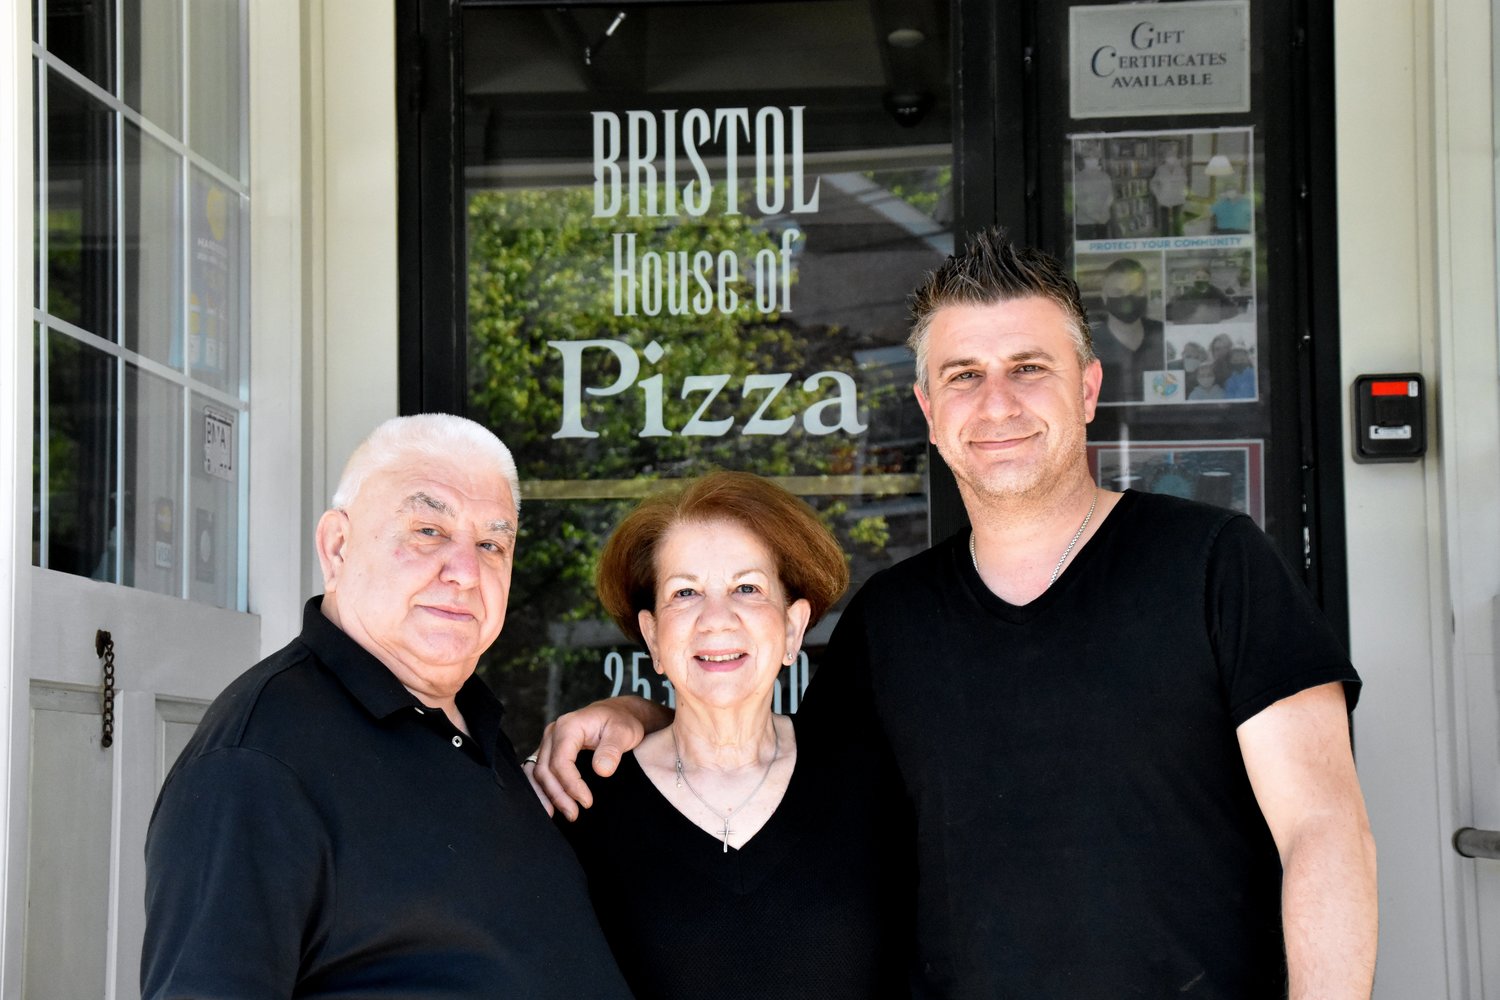 George, Tula and Greg Gatos celebrated Bristol House of Pizza's 45th anniversary recently. Together, they say it's been a great and most enjoyable experience interacting with the general public.